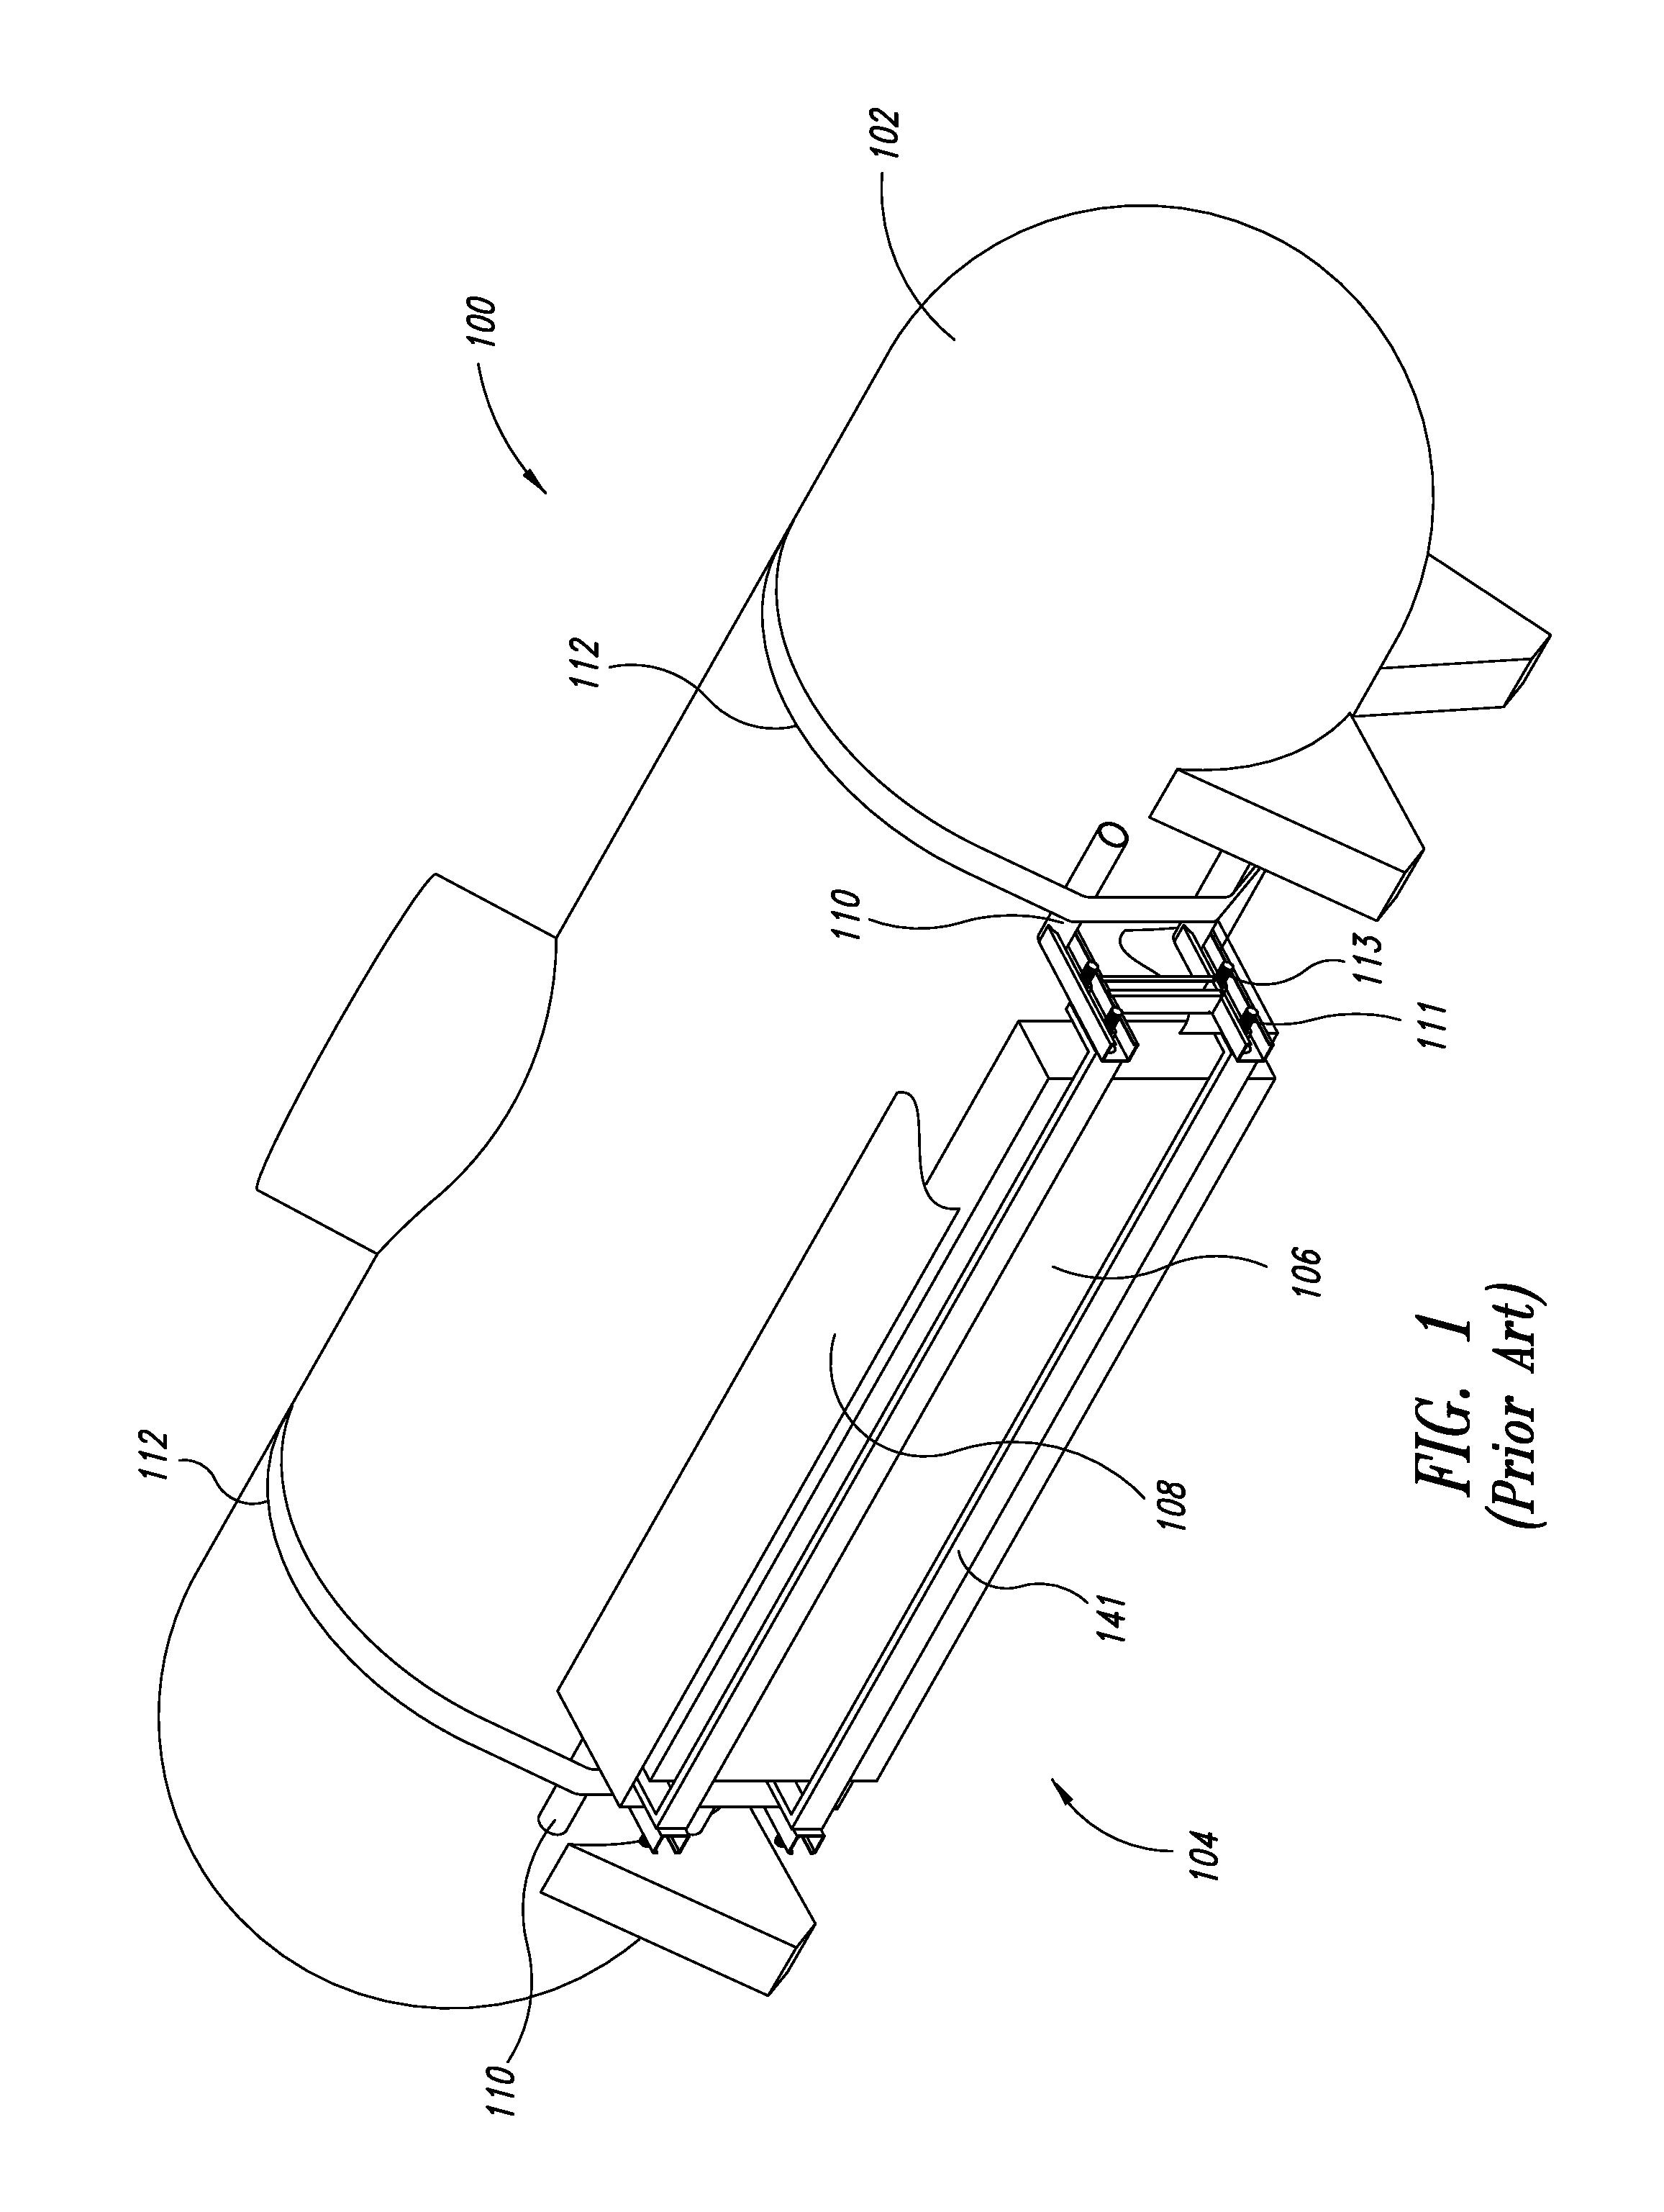 Heater with replaceable cartridge